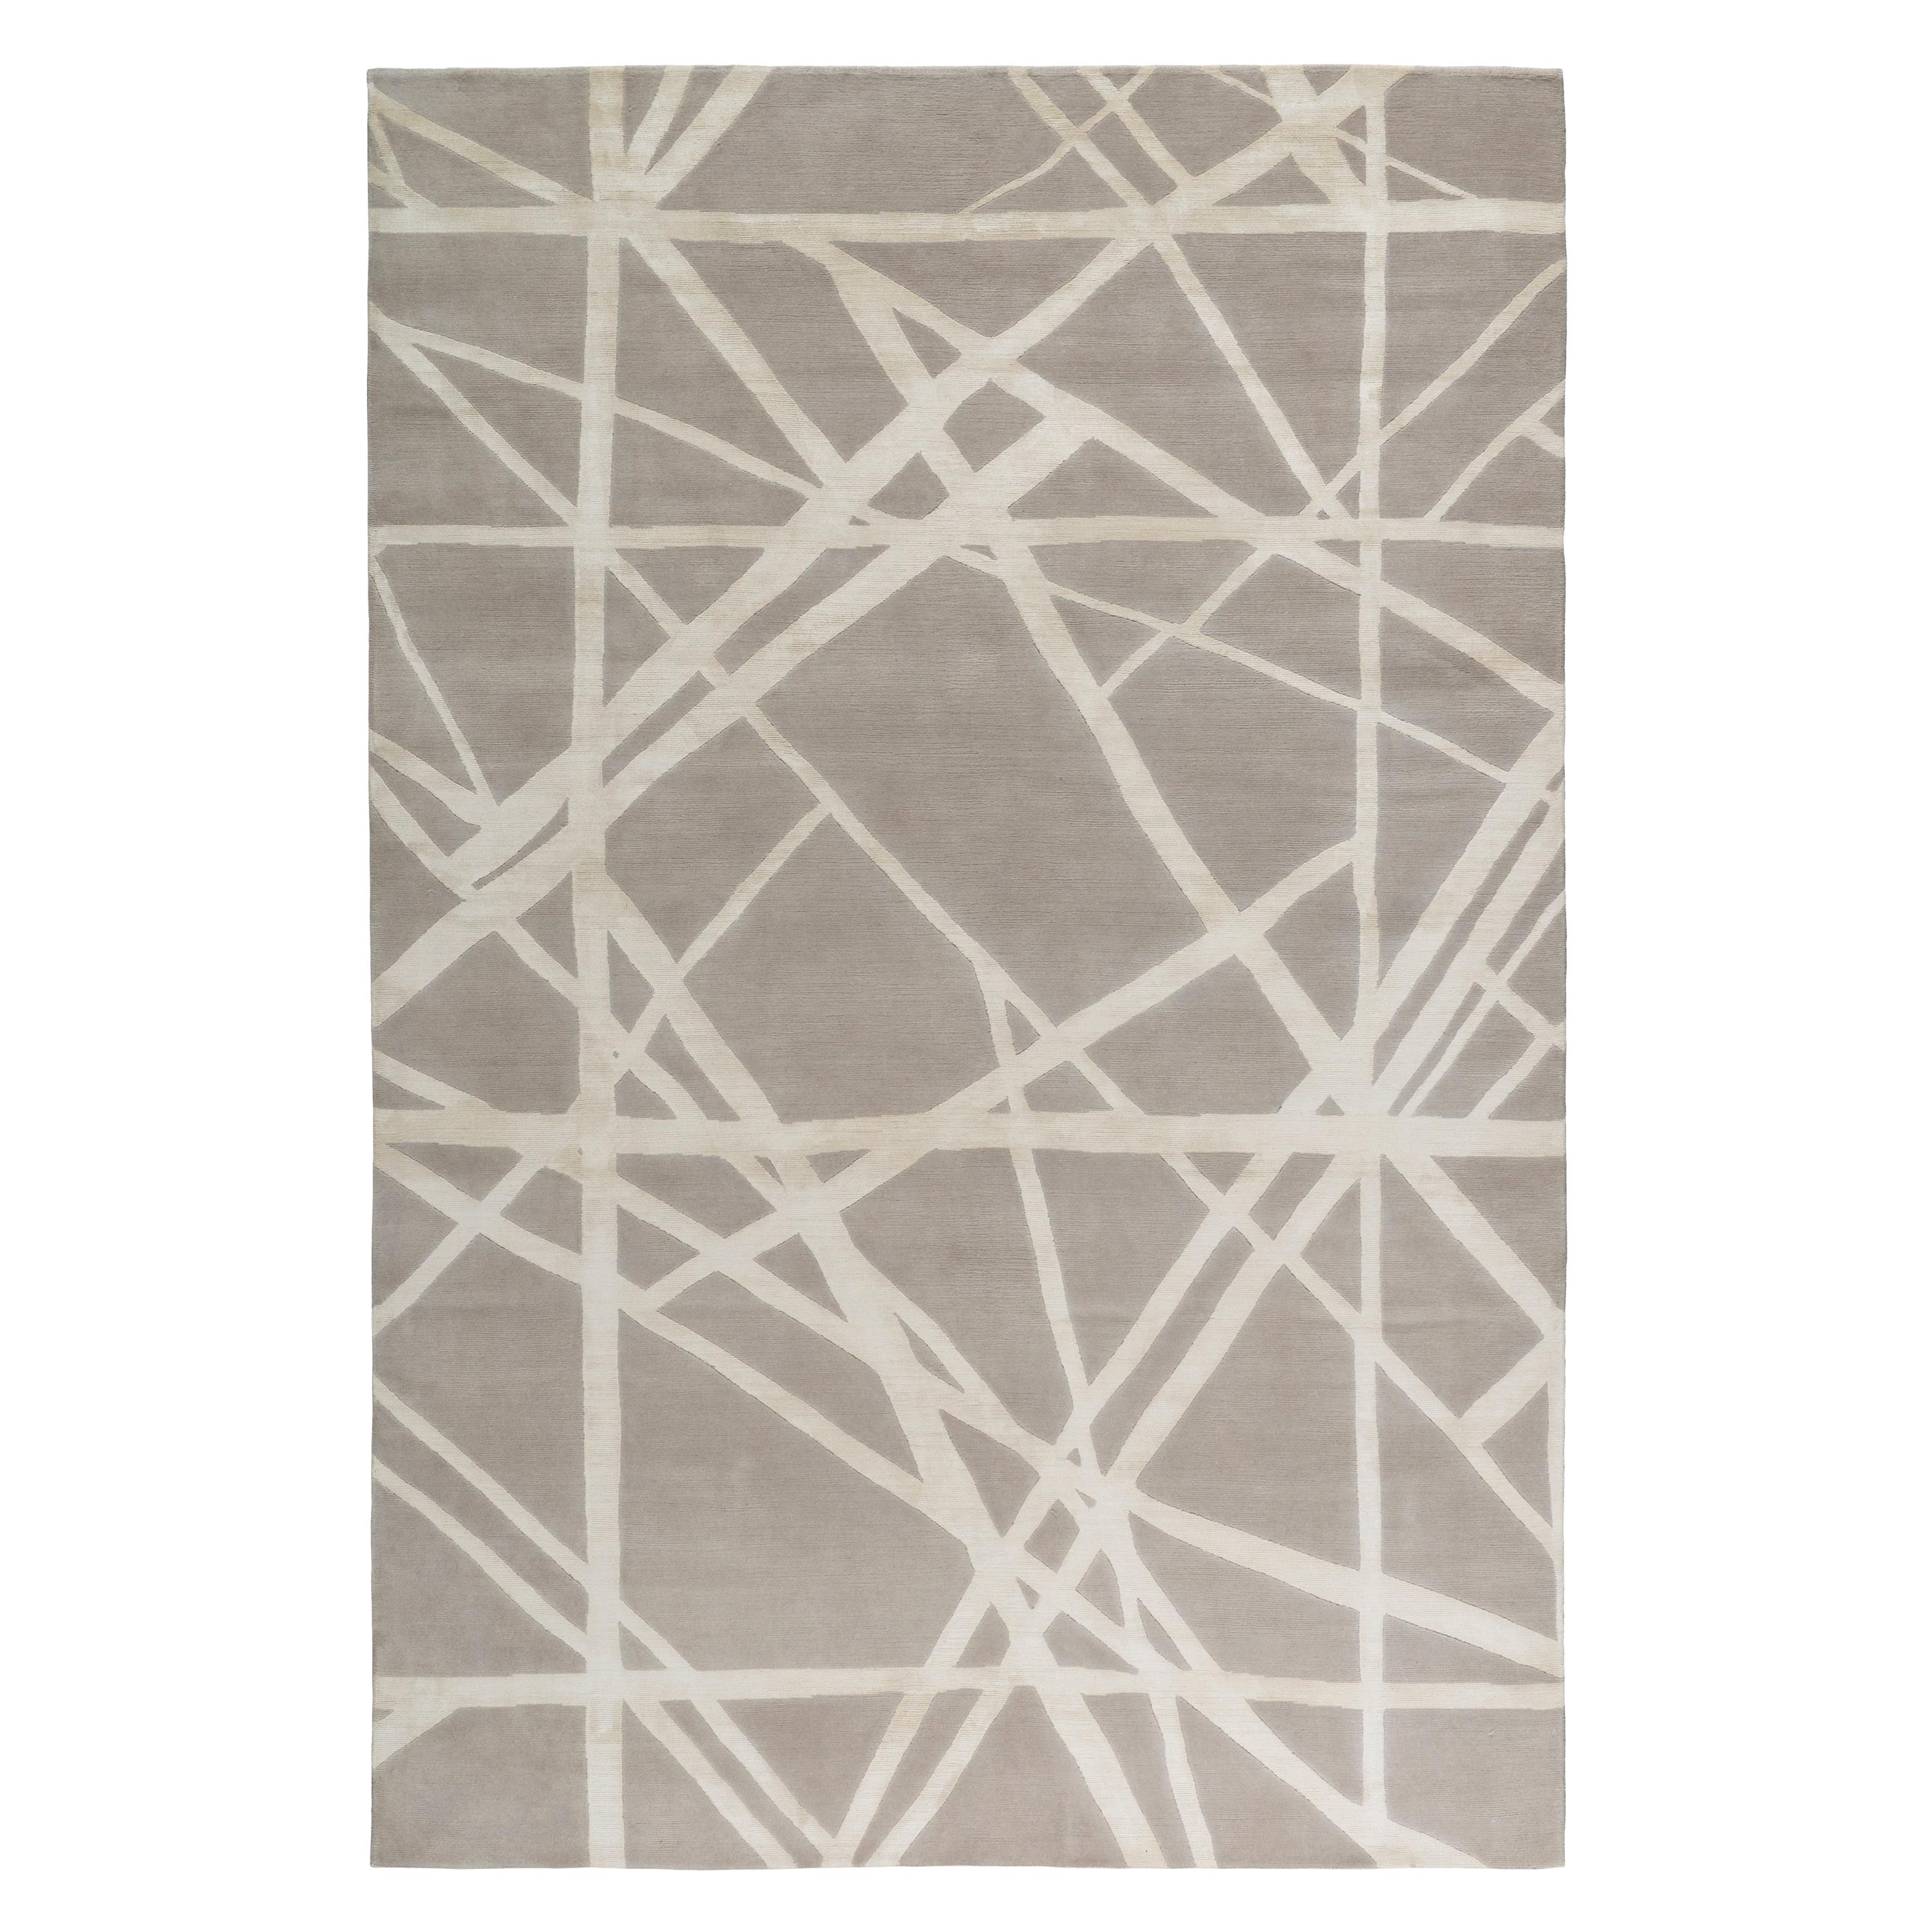 Channels Rug in Hand knotted Wool and Silk by Kelly Wearstler